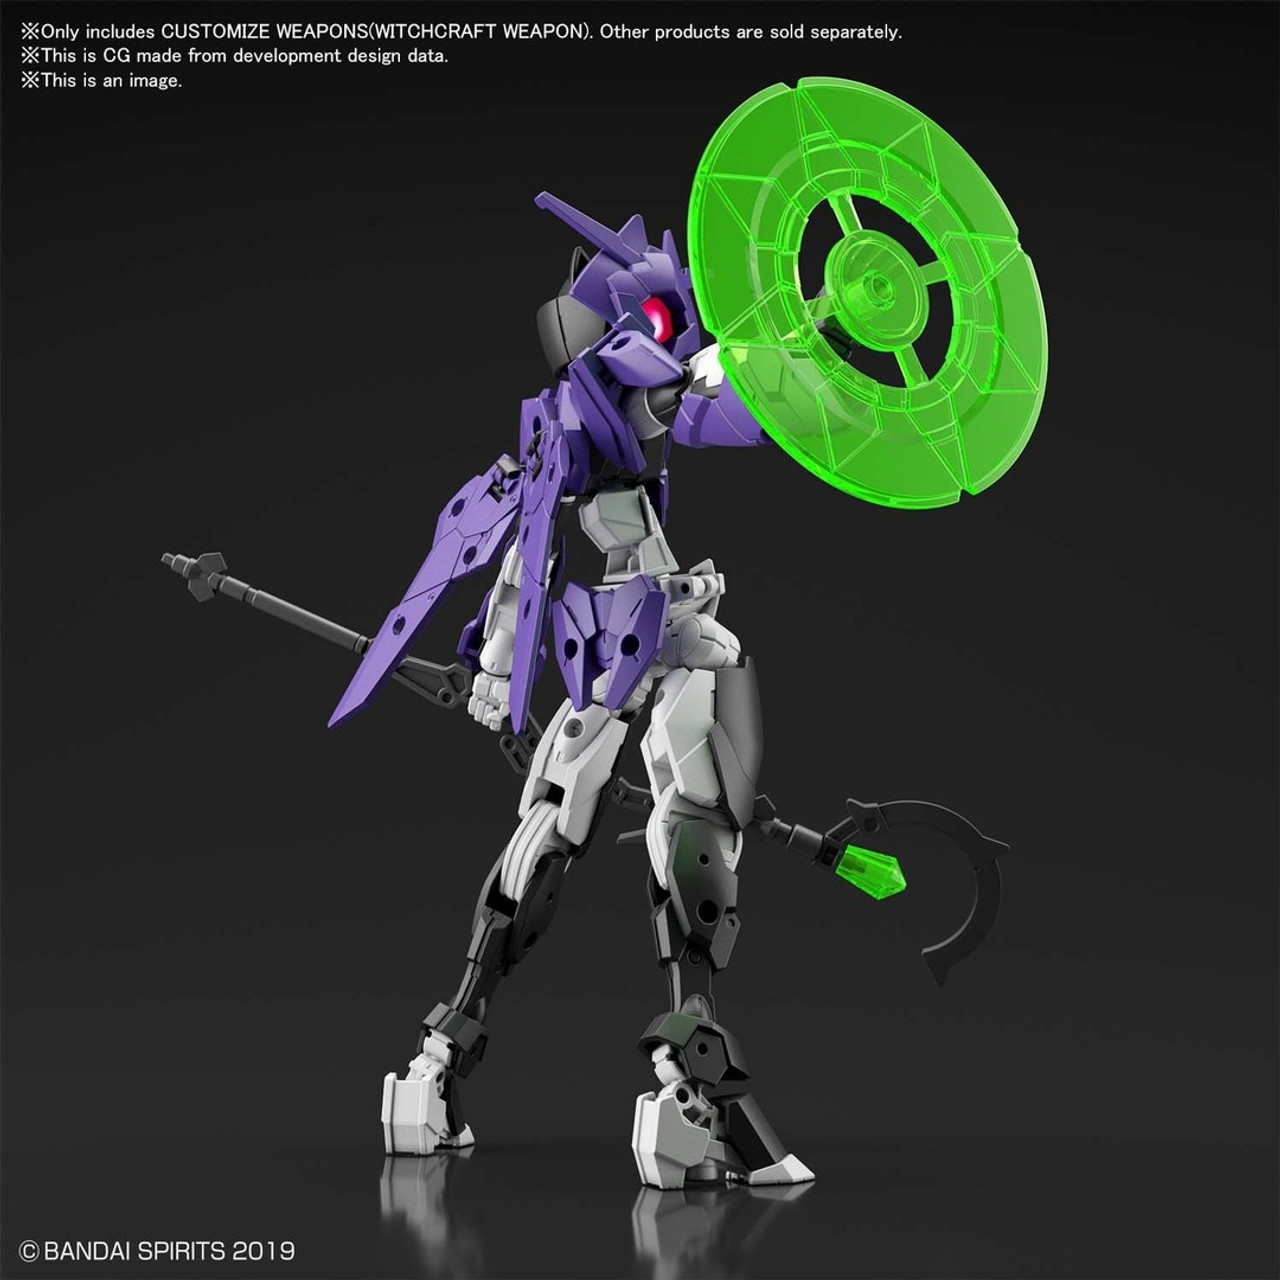 BAN2553544 Bandai Spirits 30 Minute Missions 1/144 #W-13 Customize Weapons (Witchcraft Weapon)